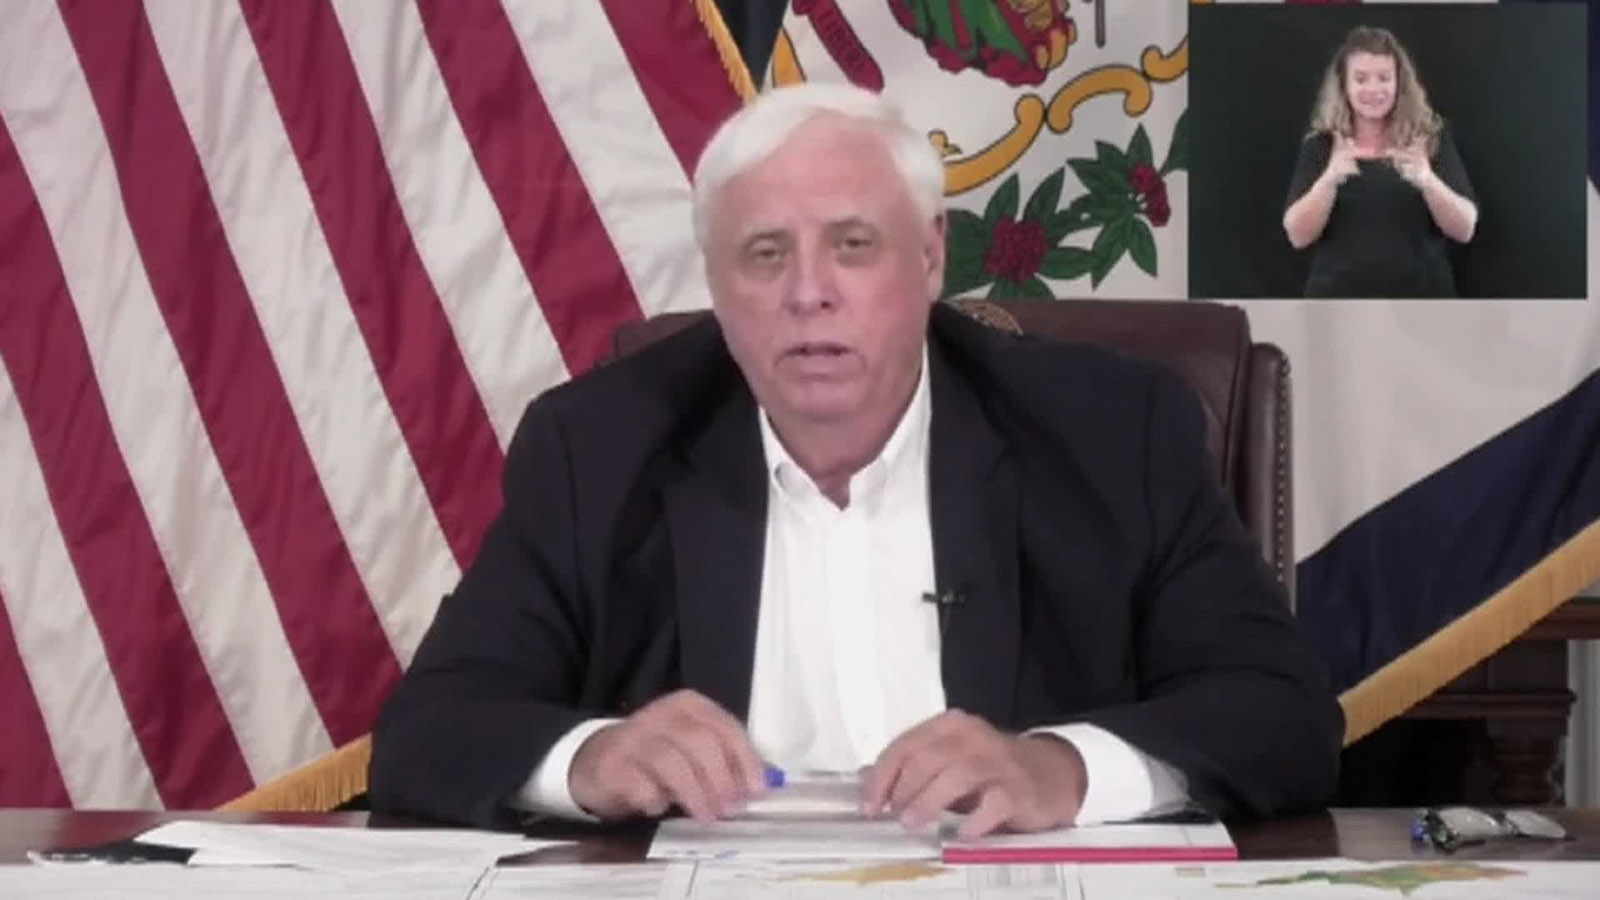 From Governor Jim Justice/YouTube